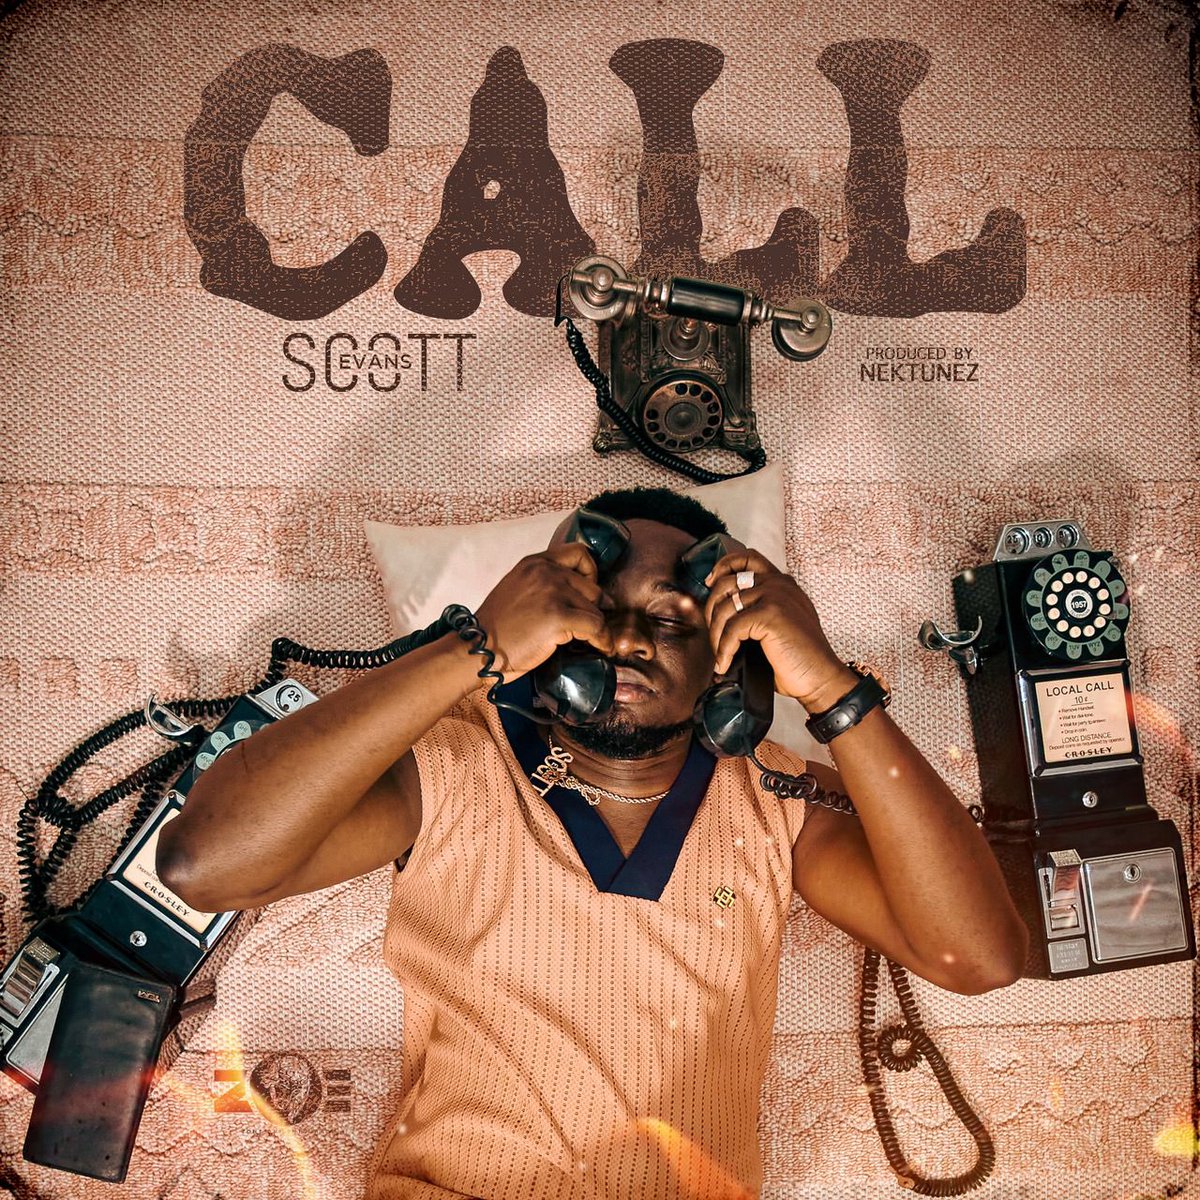 .@scottevanszb has a “Call” coming through soon.